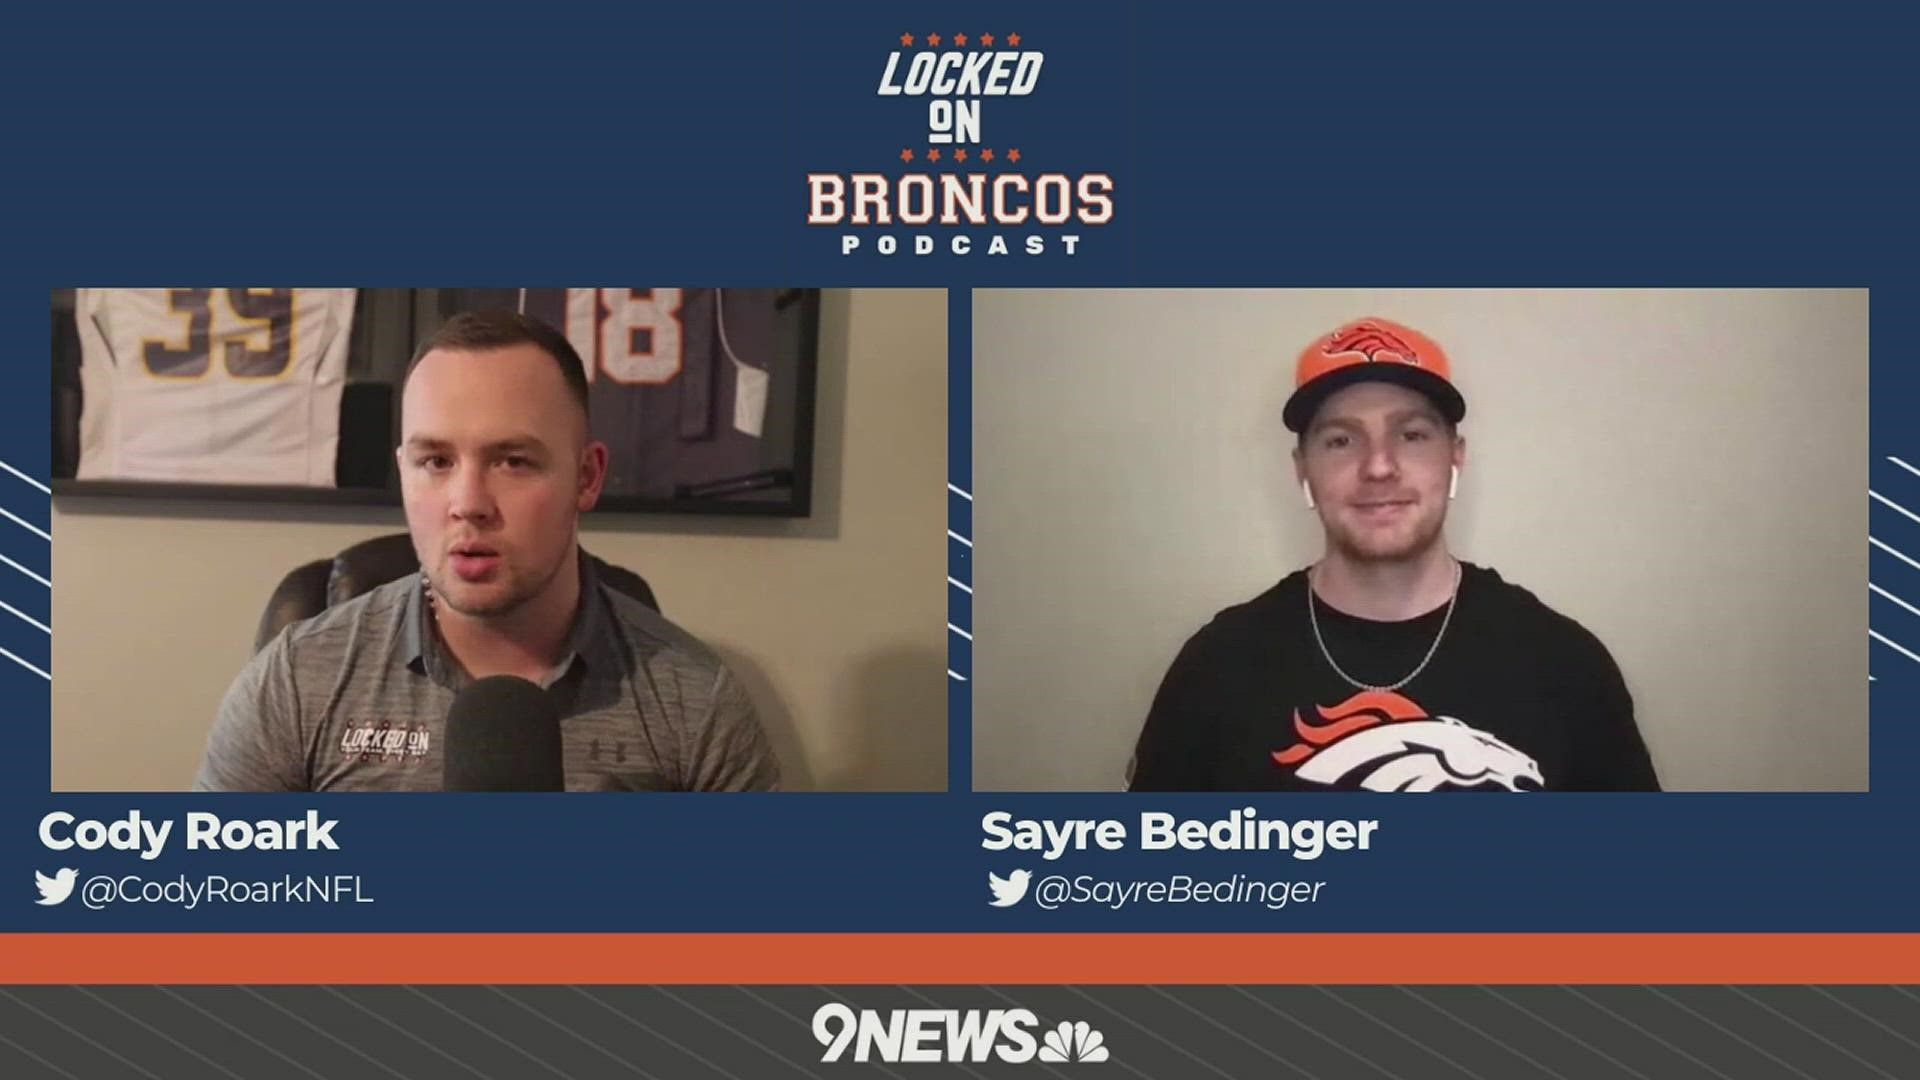 The Broncos improve to 3-0 after a shutting out the Jets. Cody Roark and Sayre Bedinger recap the victory and highlight some concerns heading into Ravens game.